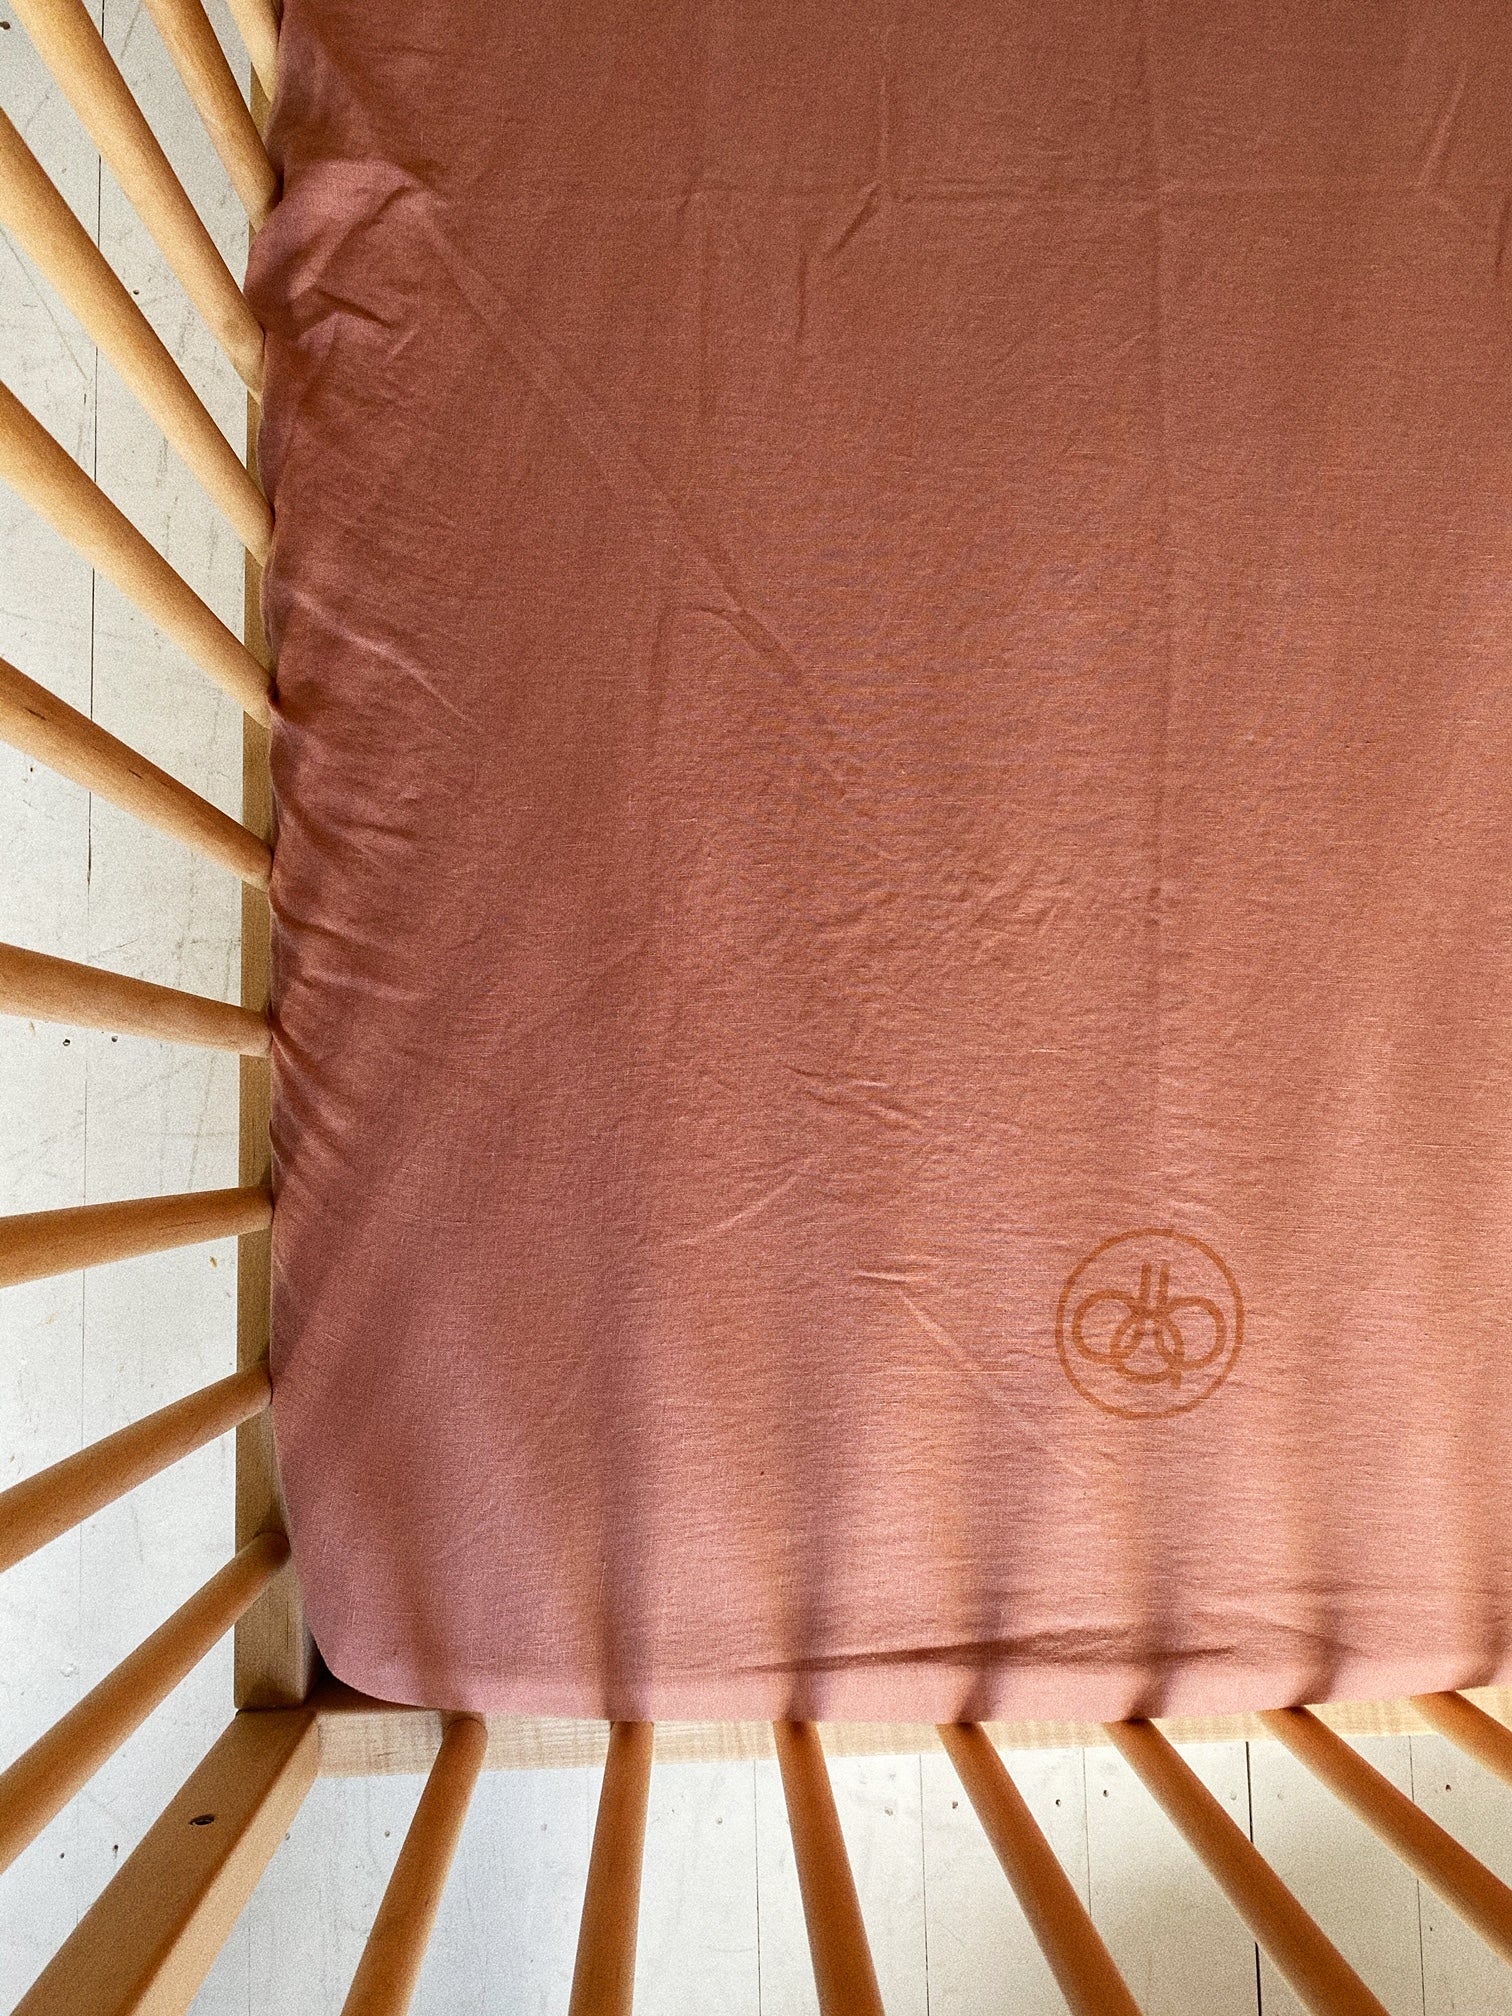 fitted cot . terra rose linen